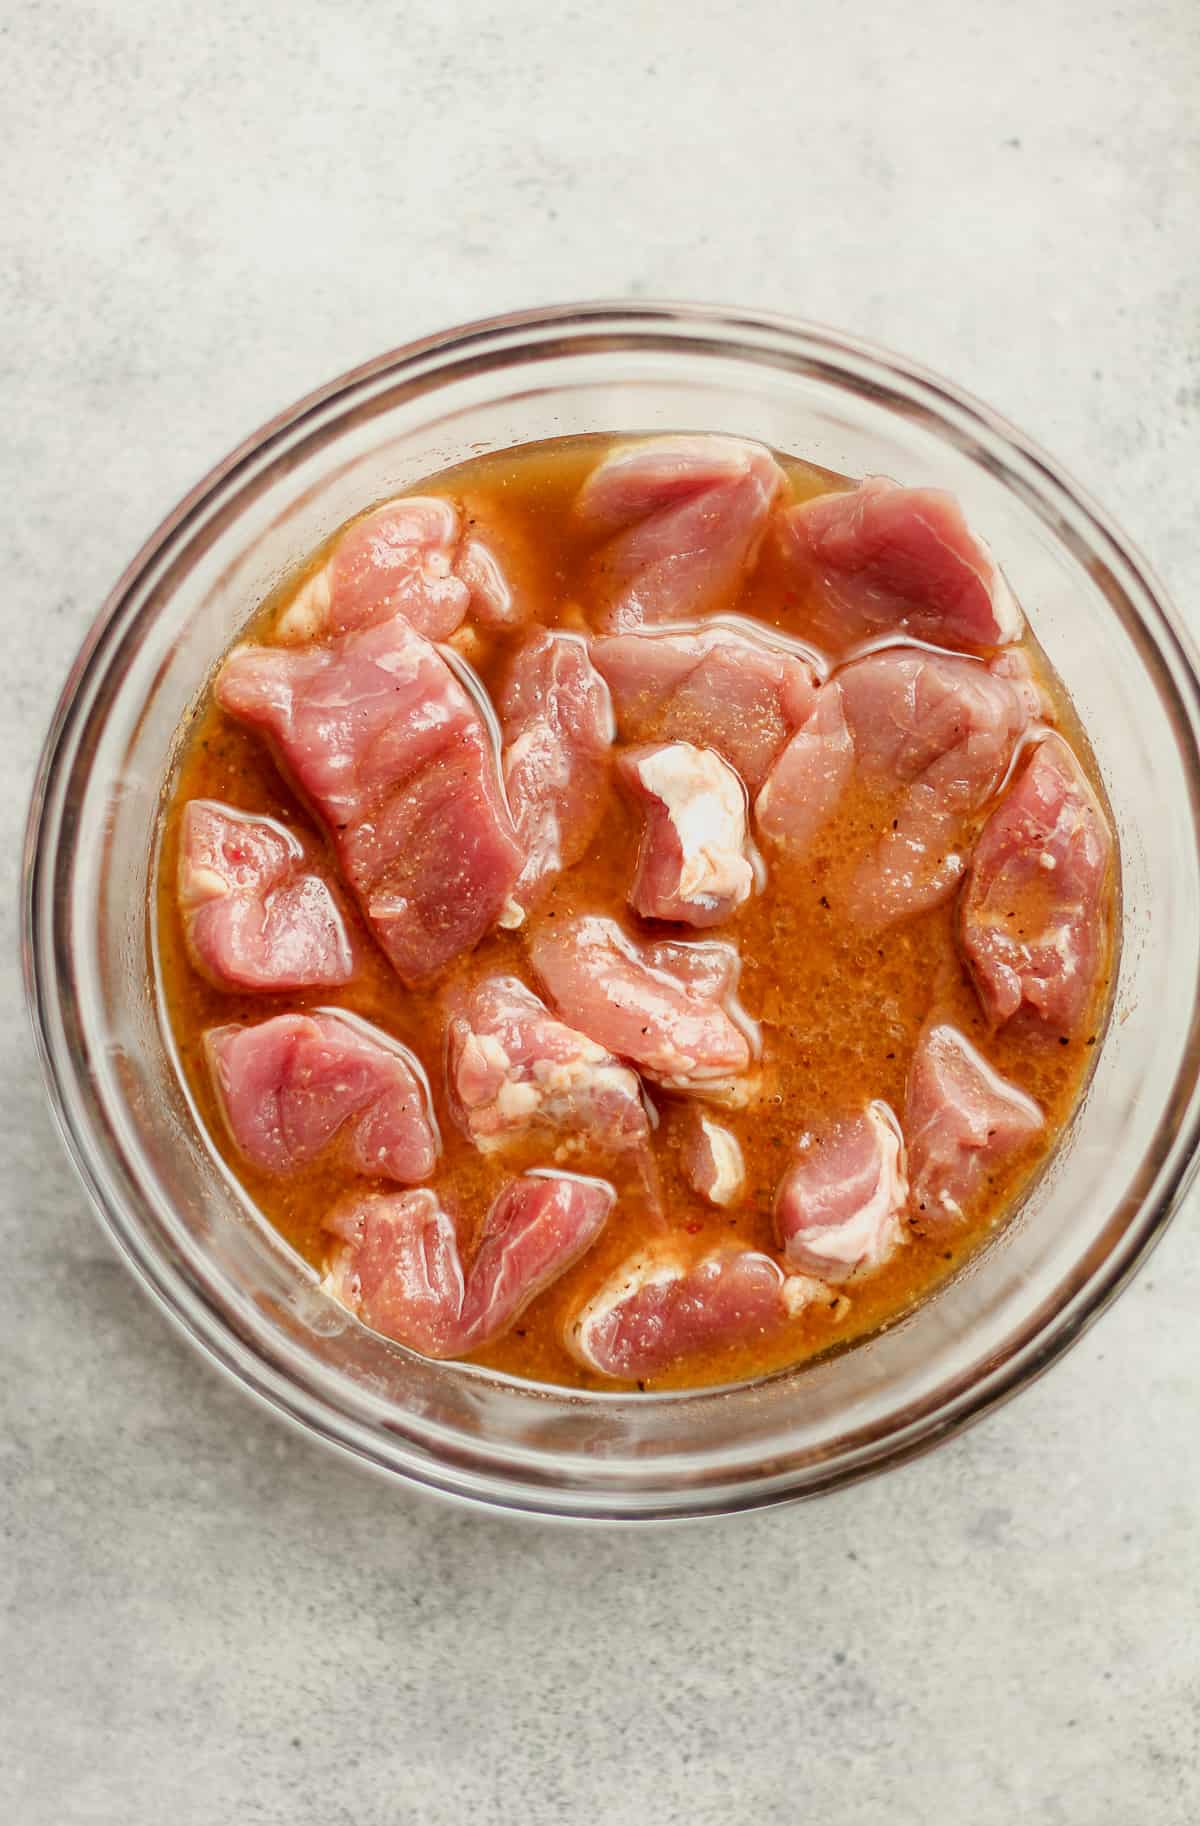 A bowl of the pork pieces in the marinade.